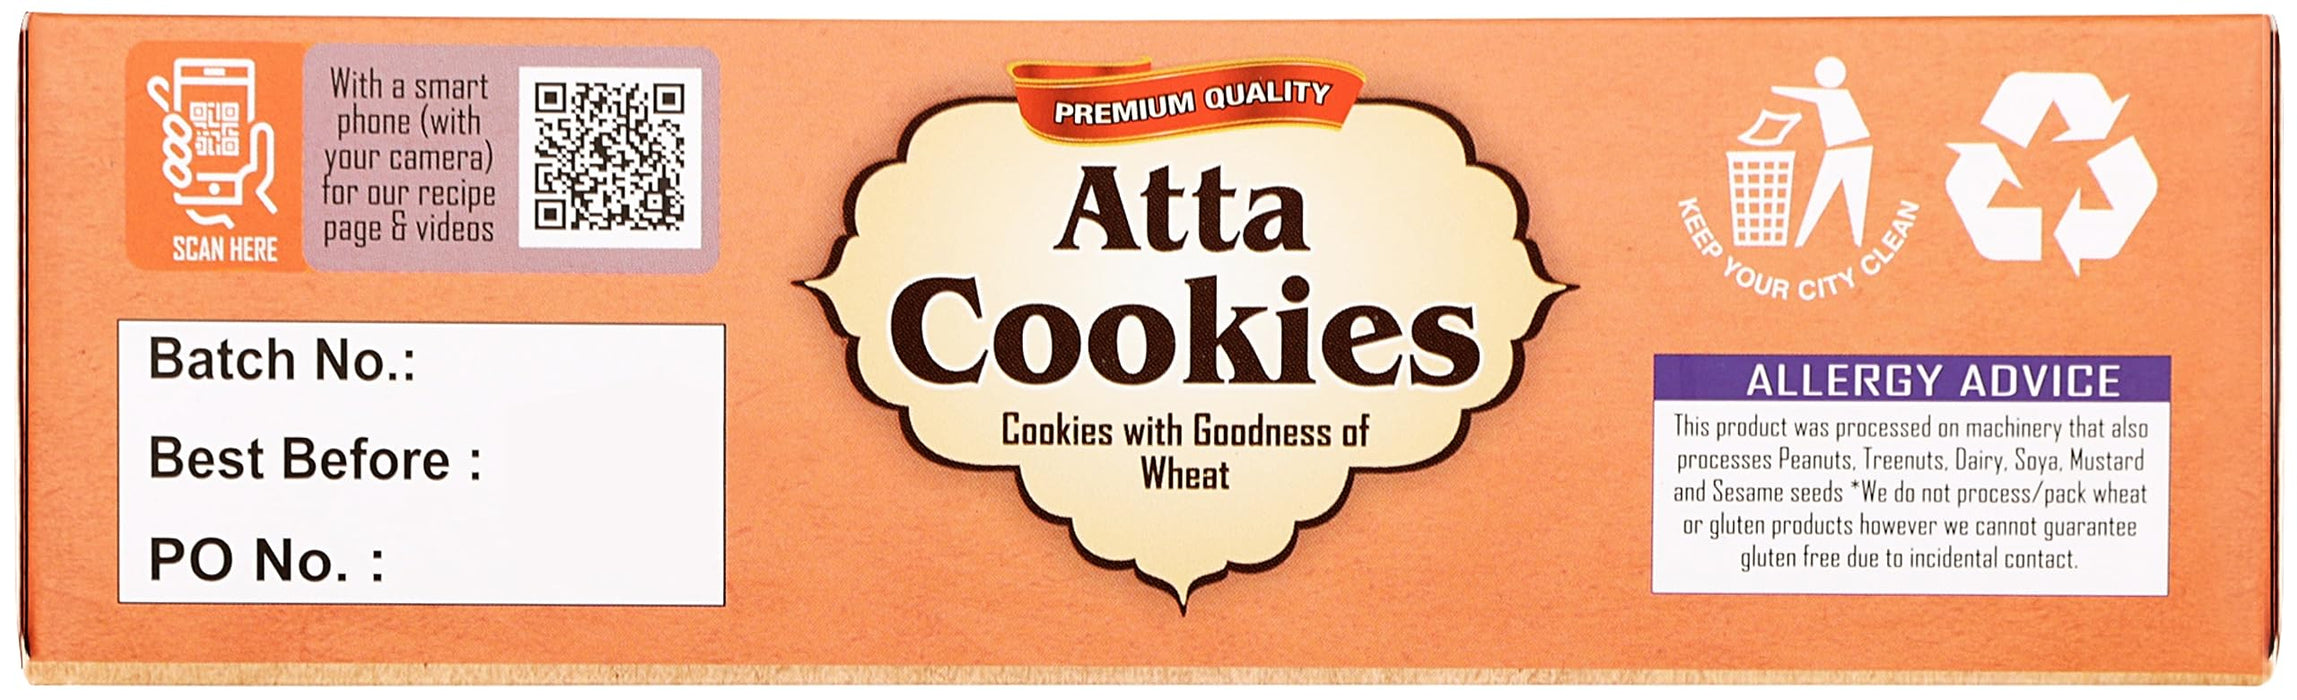 Rani Atta Cookies (Cookies with the Goodness of Wheat) 14oz (400g) Premium Quality Indian Cookies ~ All Natural | Vegan | Non-GMO | Indian Origin